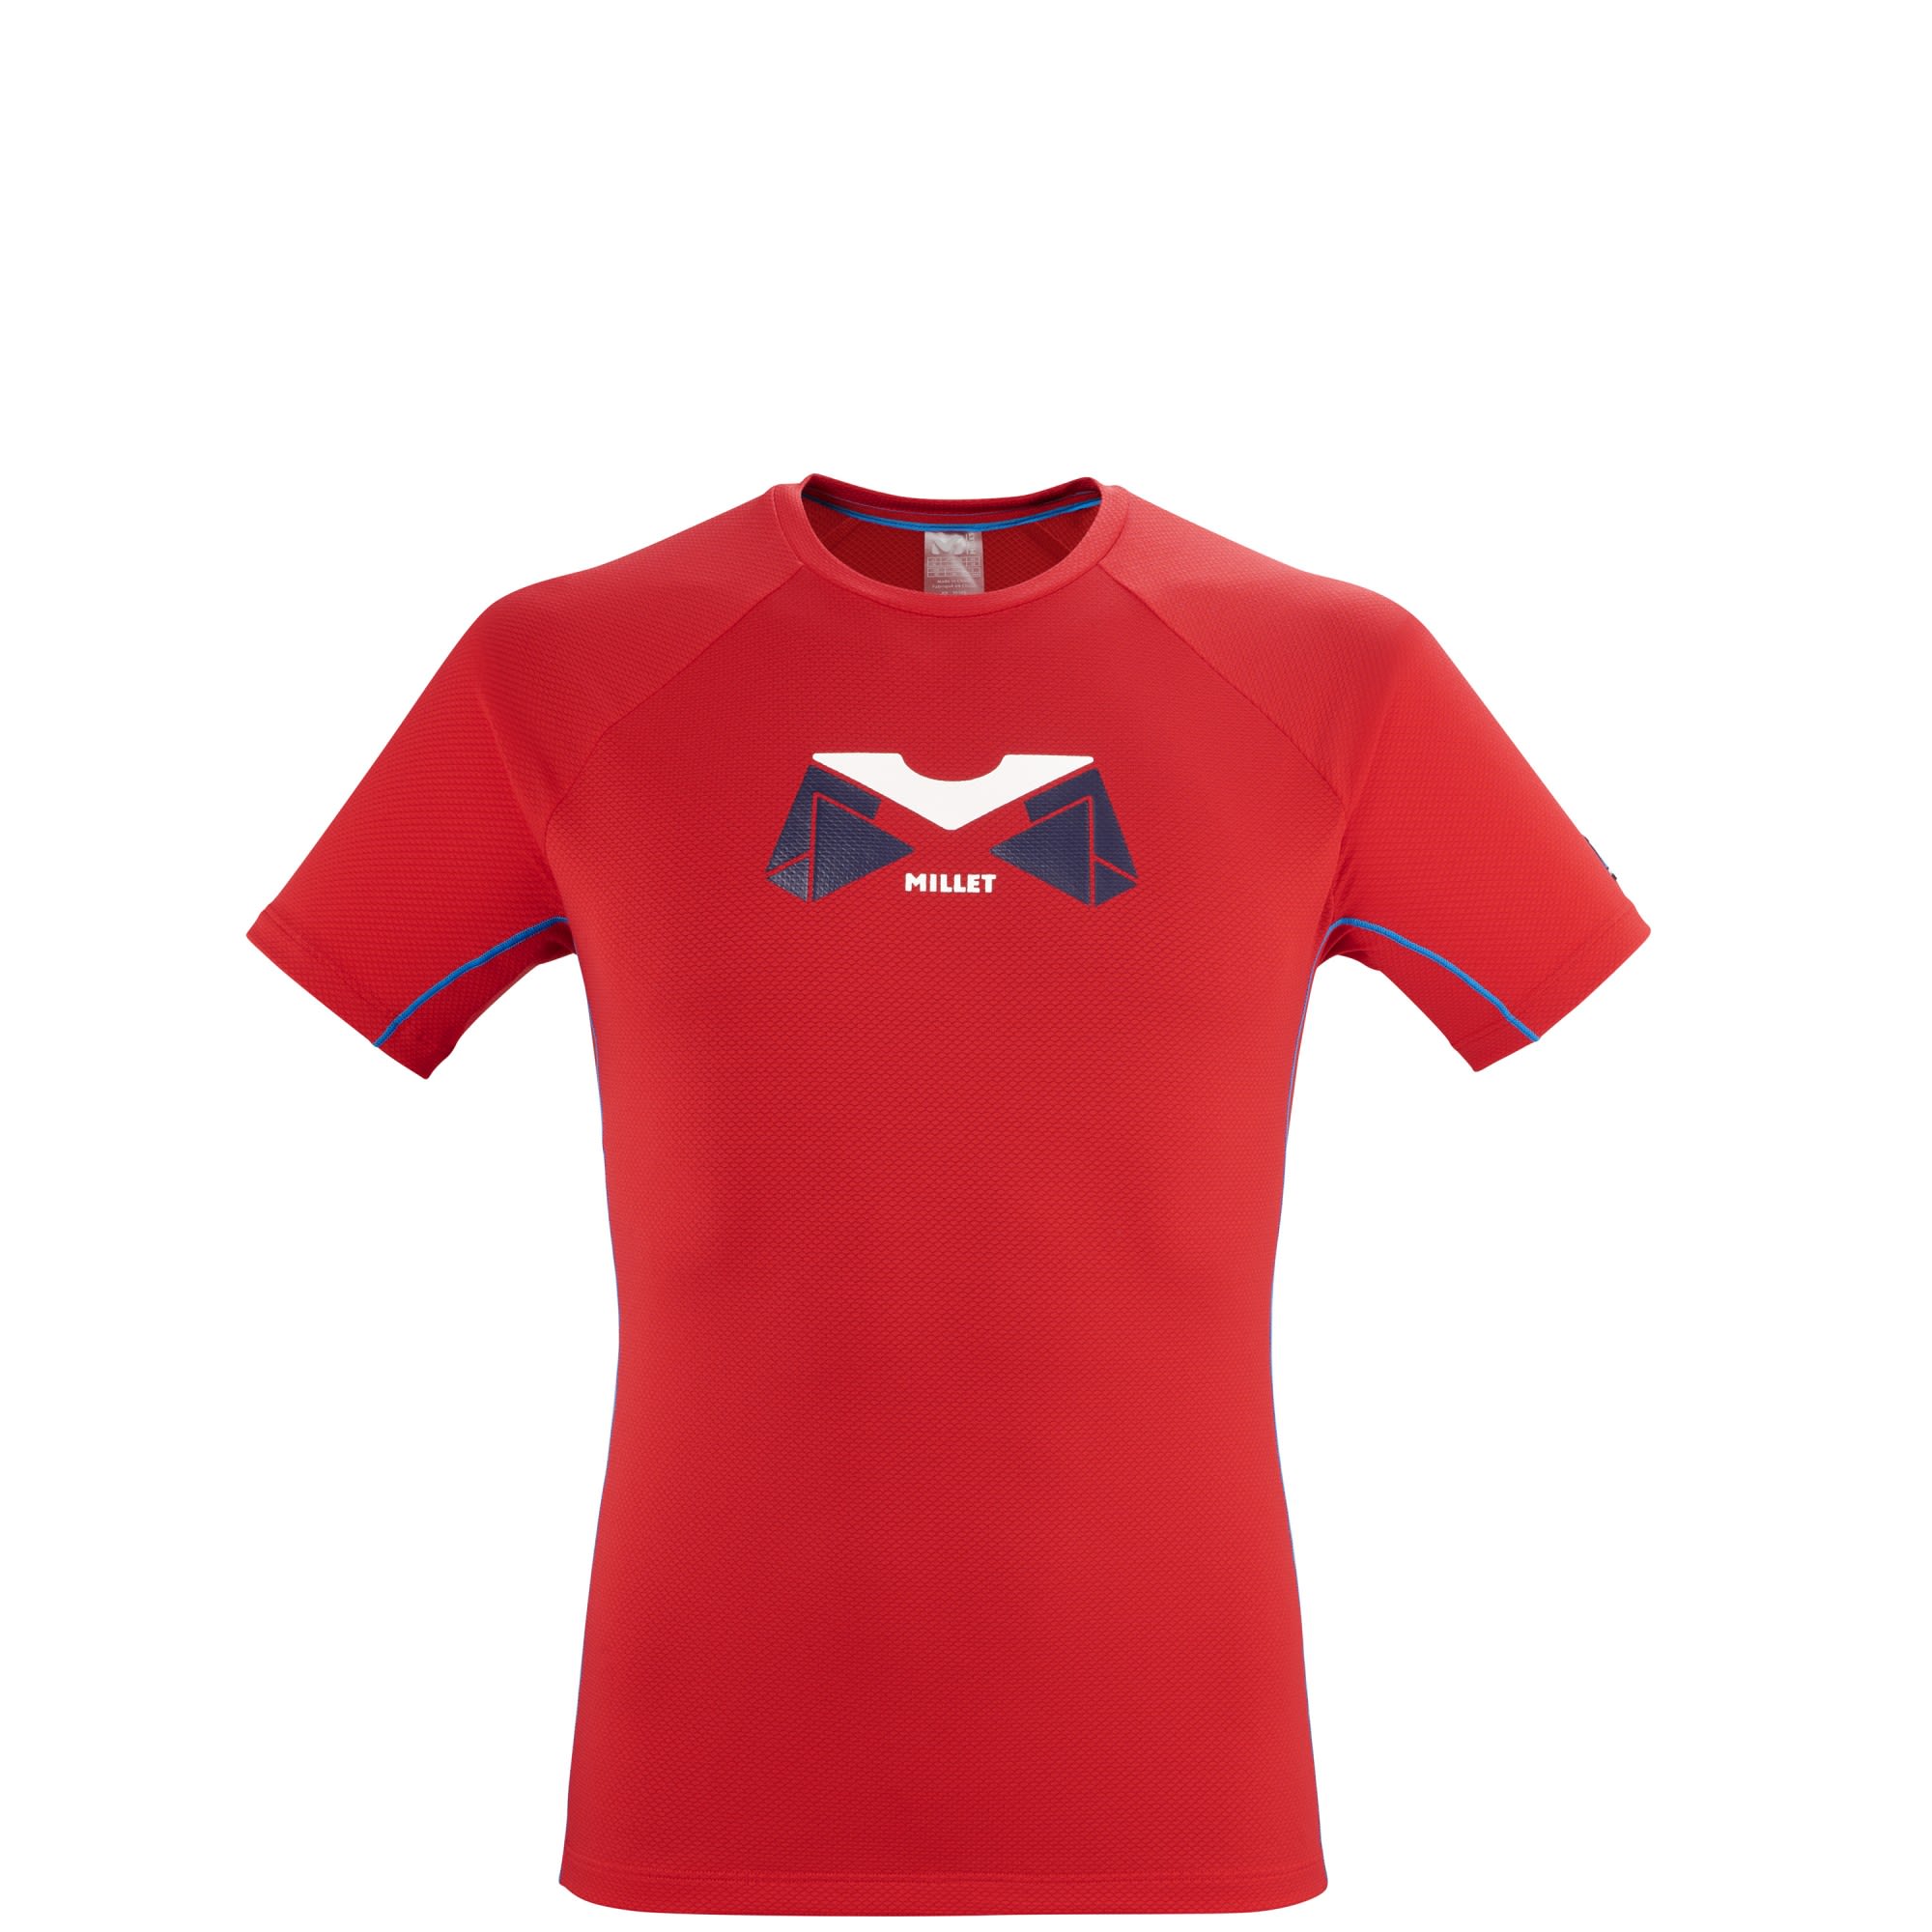 Millet Trilogy Delta ORI TS Short-Sleeve Rot- Male Polartec(R) T-Shirts- Grsse S - Farbe Red - Rouge unter Millet